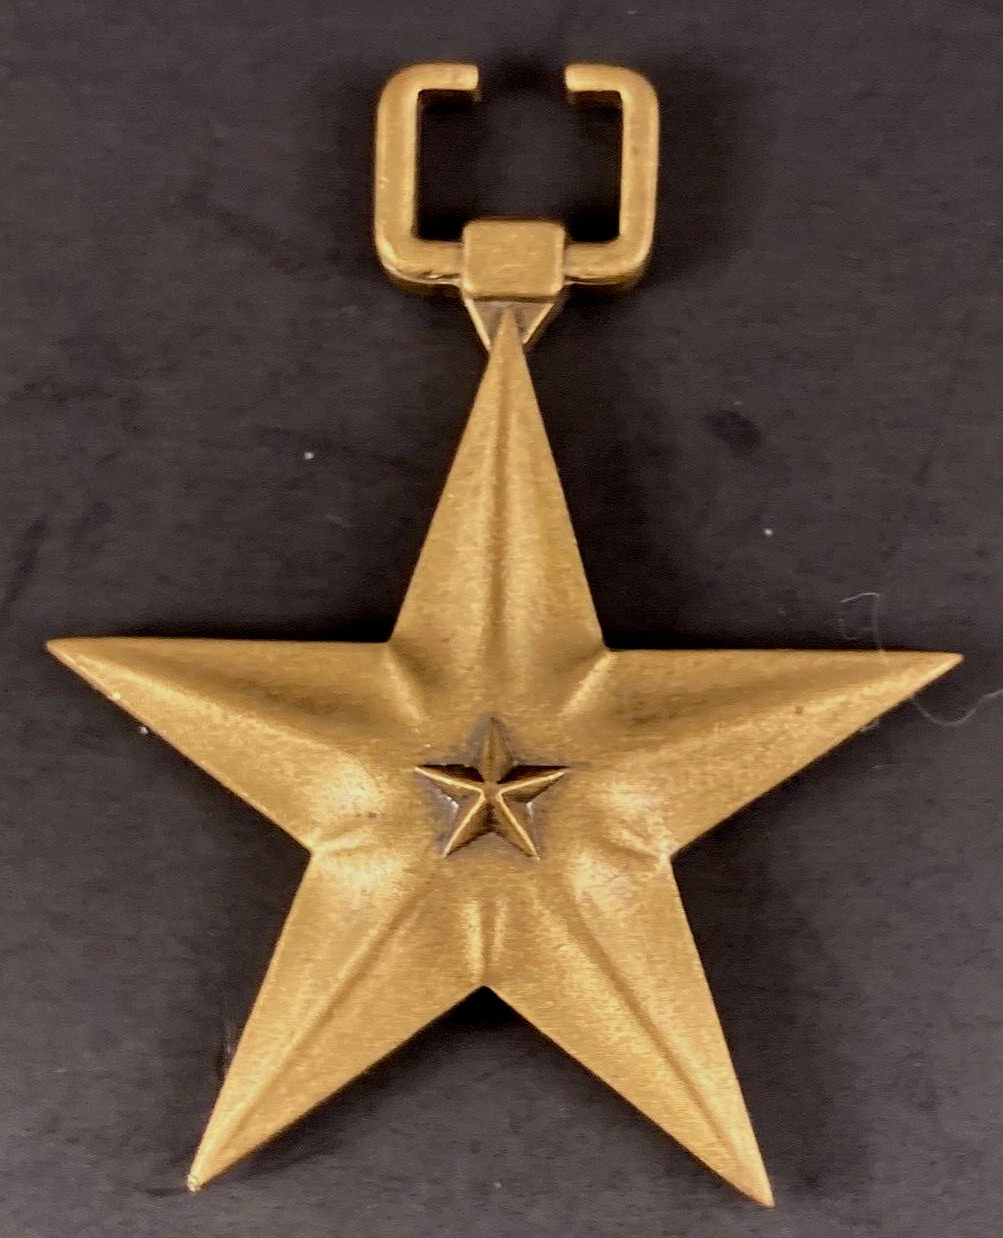 RARE NAMED WWII BRONZE STAR COMBAT AWARD DOUBLE STRIKE UN-ISSUED VG CONDITION